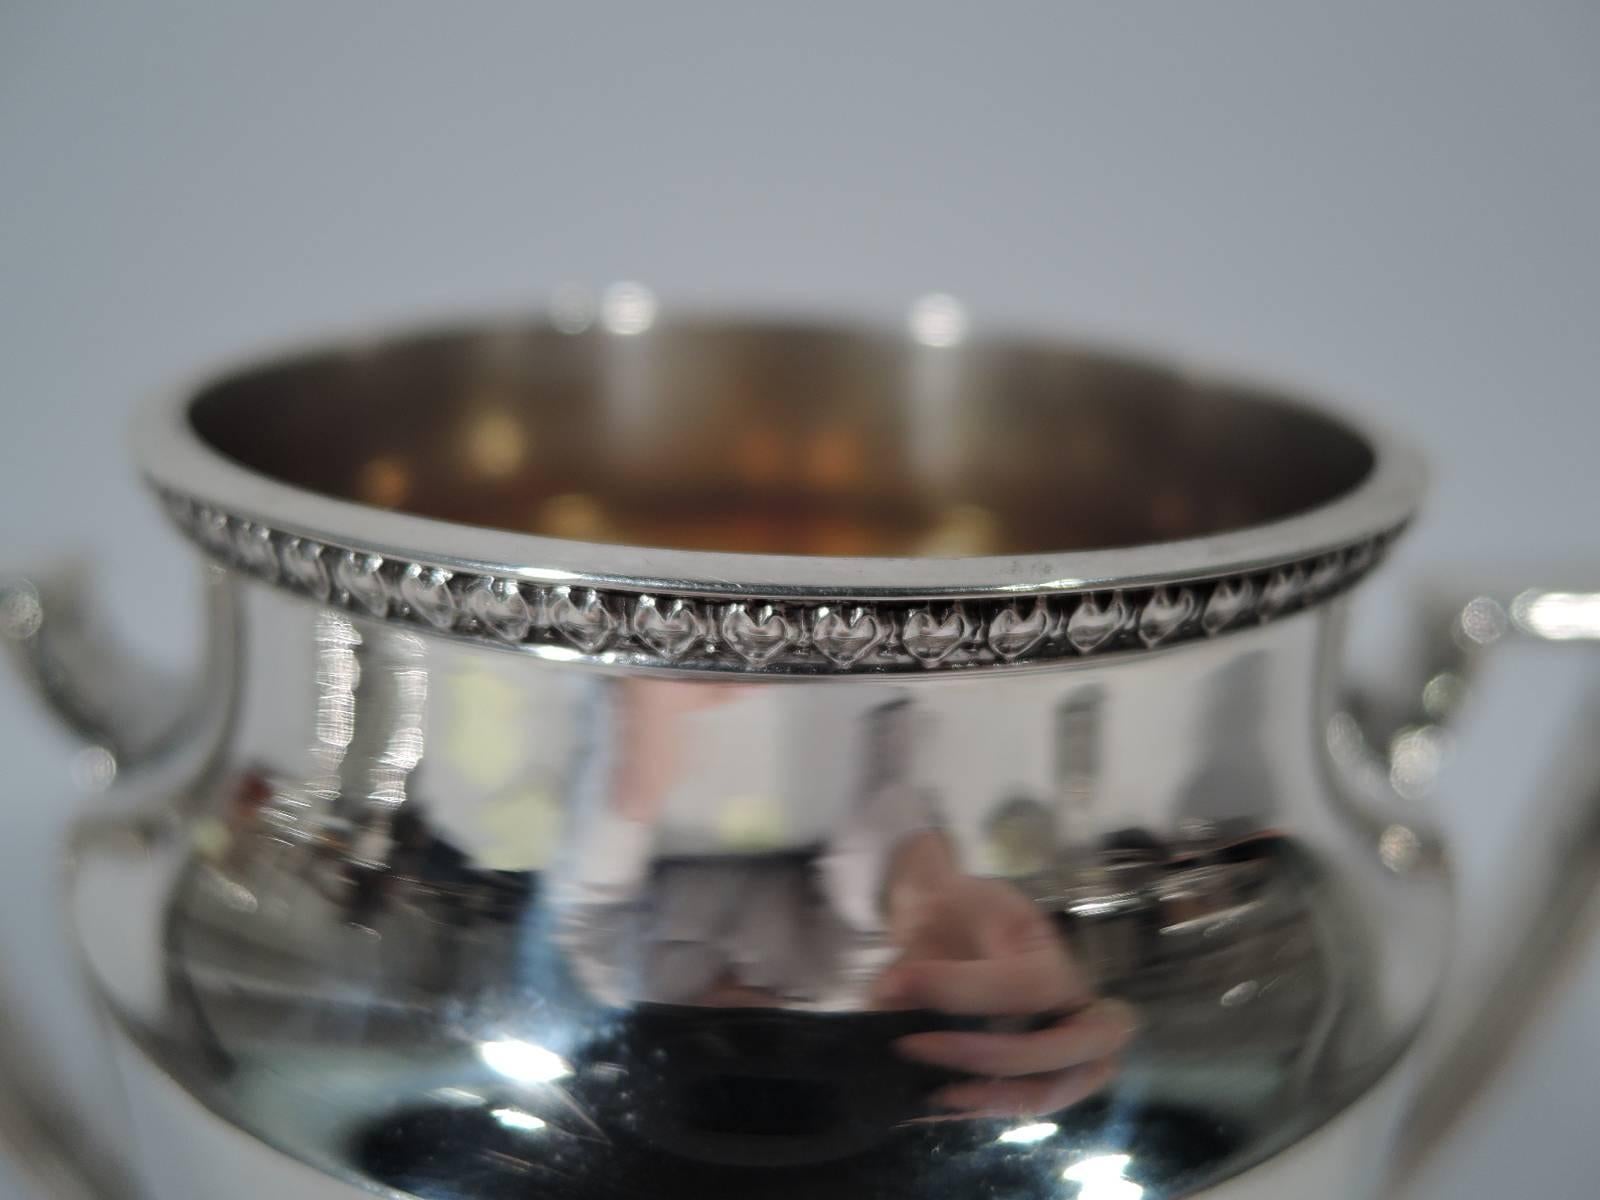 Sterling silver trophy cup. Made by R. Wallace & Sons Mfg Co. in Wallingford, circa 1940. Tapering bowl with raised border, inset mouth, and leaf-and-dart rim. Scrolled bracket handles and stepped foot. Gilt interior. Hallmark includes no. 2739.